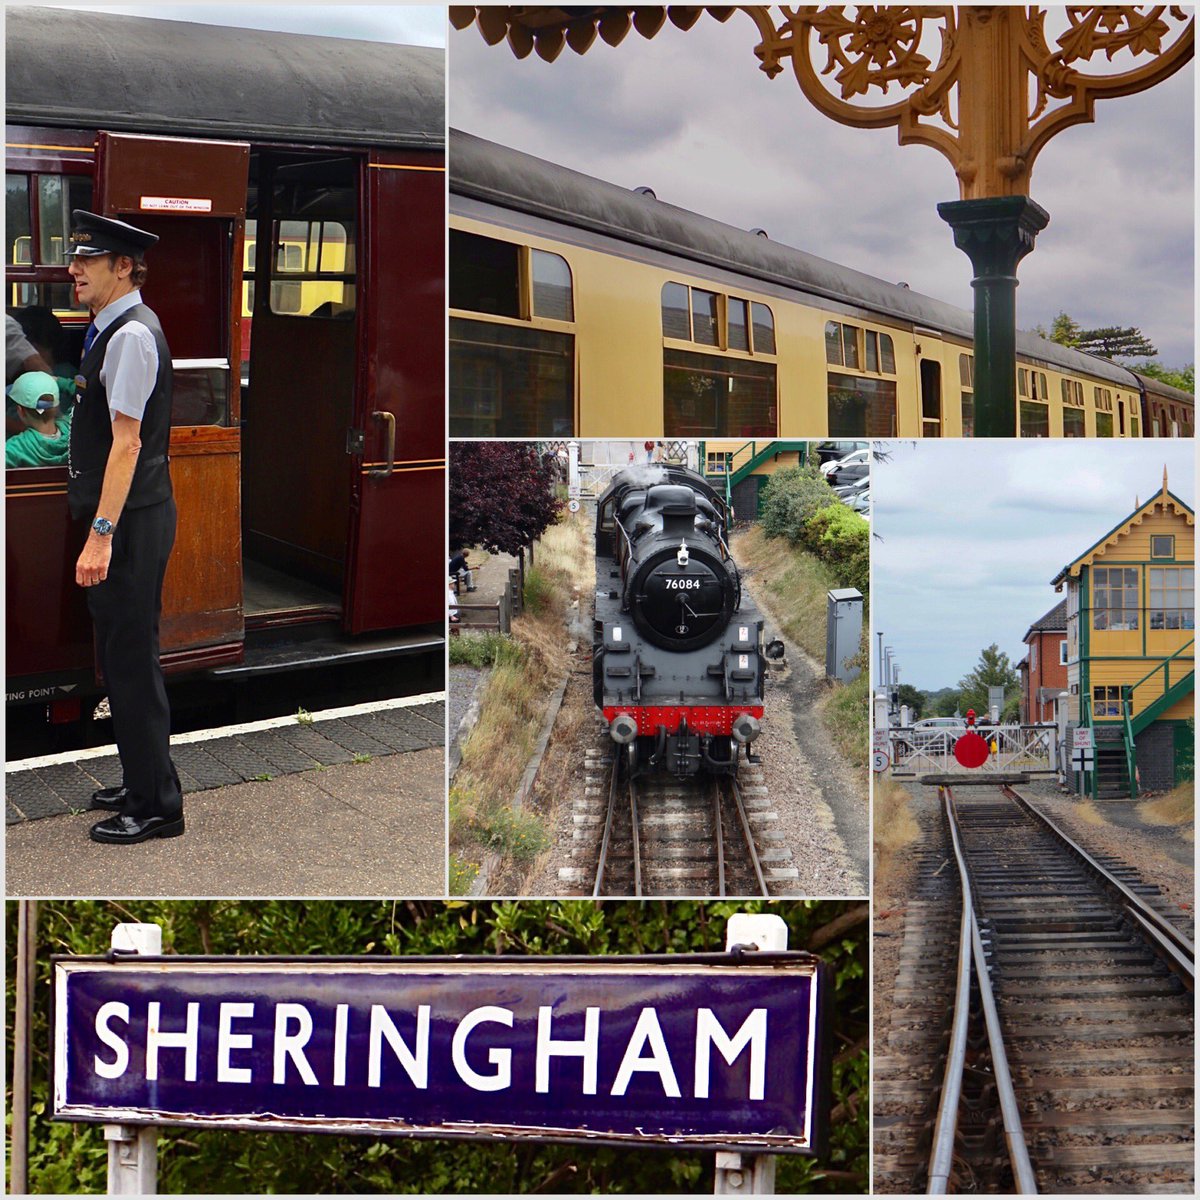 Last stop in Sheringham was a quick visit to the North Norfolk Railway station #NorthNorfolkRailway #Sheringham #SteamRailway #LivingHistory #HistoricalRecreation #SignalBox #LevelCrossing #Norfolk #OhMrPorter